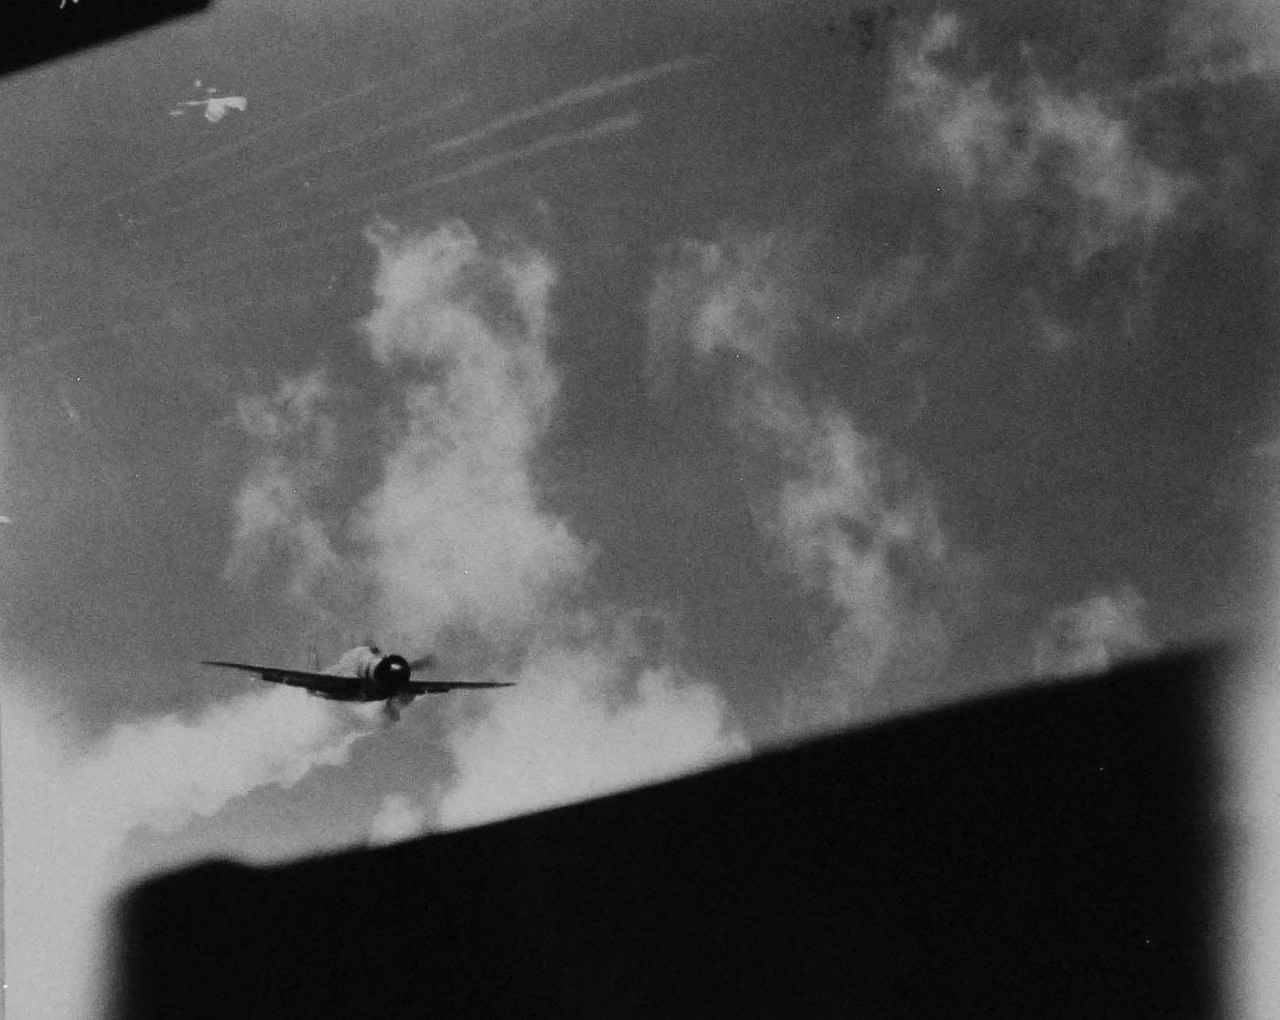 80-G-270648:  USS Essex (CV-9), November 25, 1944.  Japanese Yokosuka D4Y “Judy” making a kamikaze dive on USS Essex (CV-9), off the Philippines.  Photographed from Essex.   This plane struck near the forward elevator.    Official U.S. Navy photograph, now in the collections of the National Archives.    